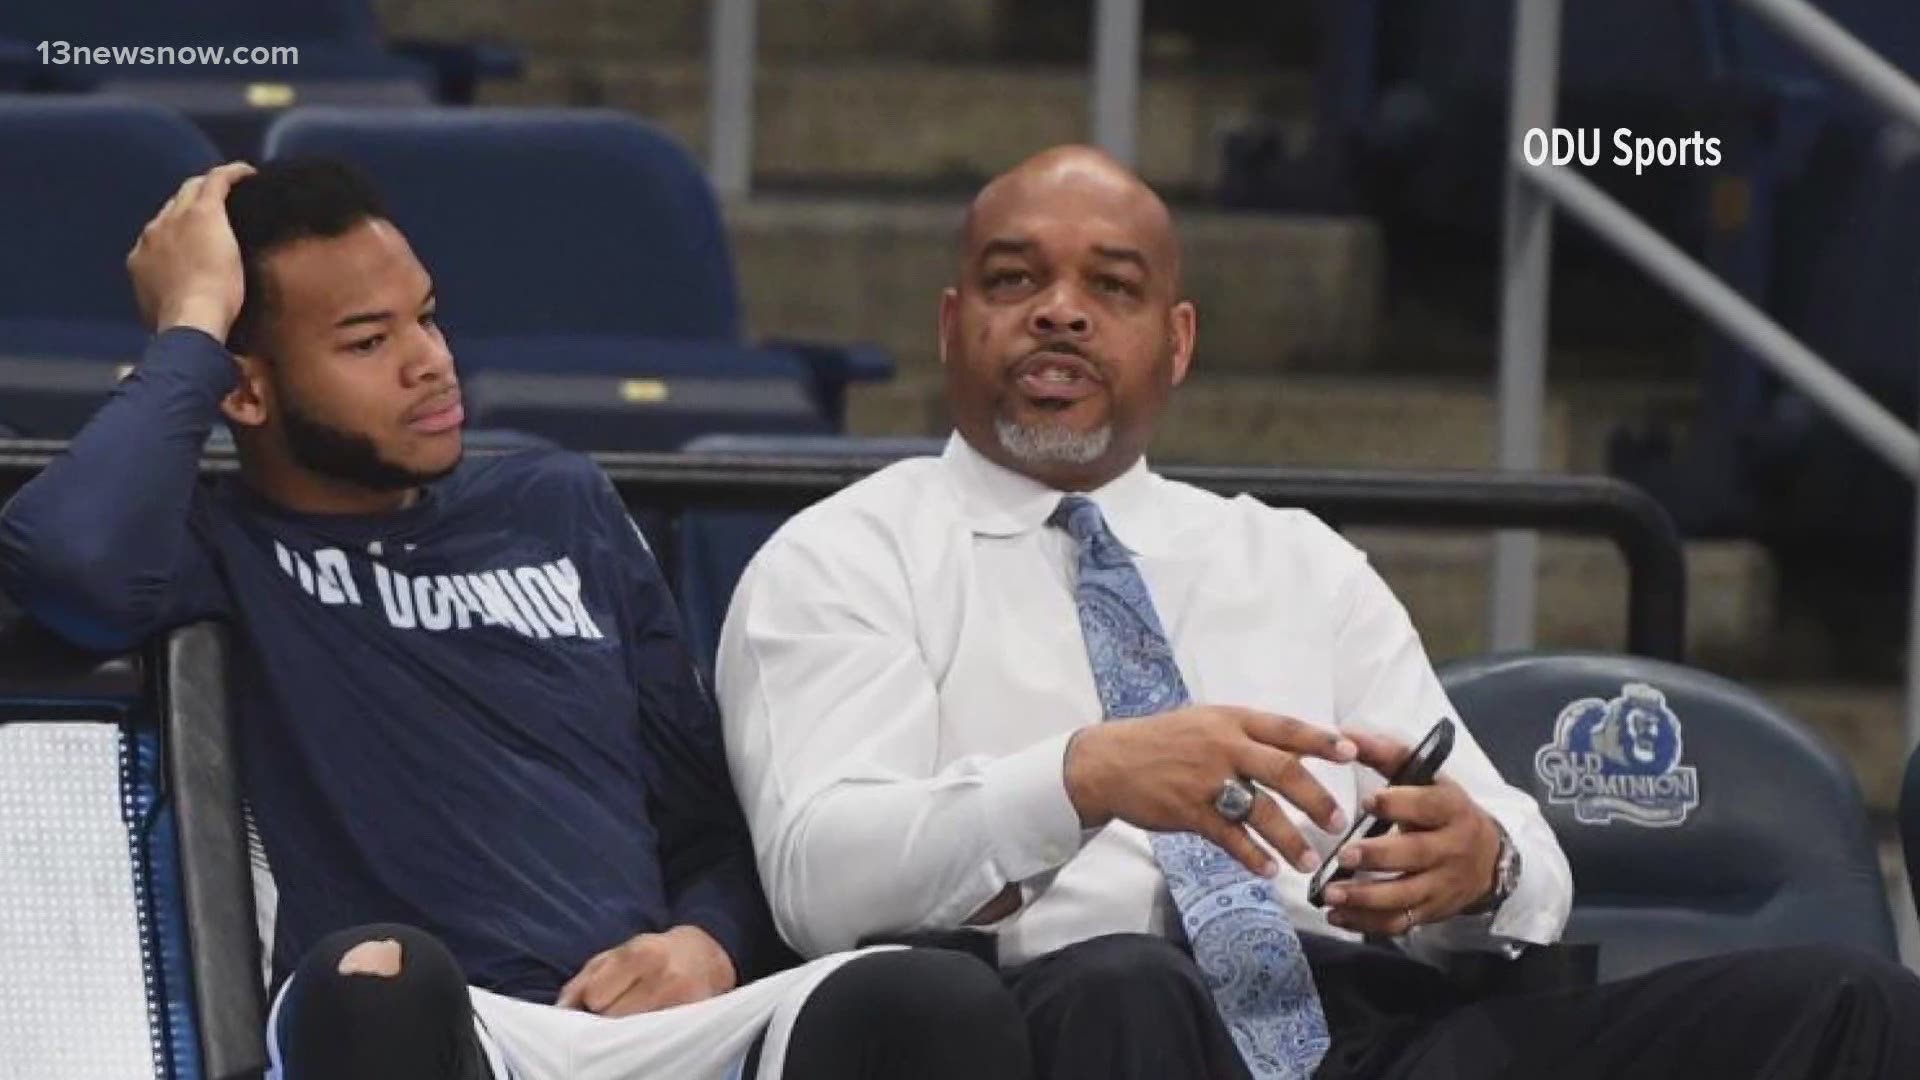 Minium: An “Intervention From God” May Have Saved the Life of ODU  Basketball Assistant Coach Bryant Stith - Old Dominion University